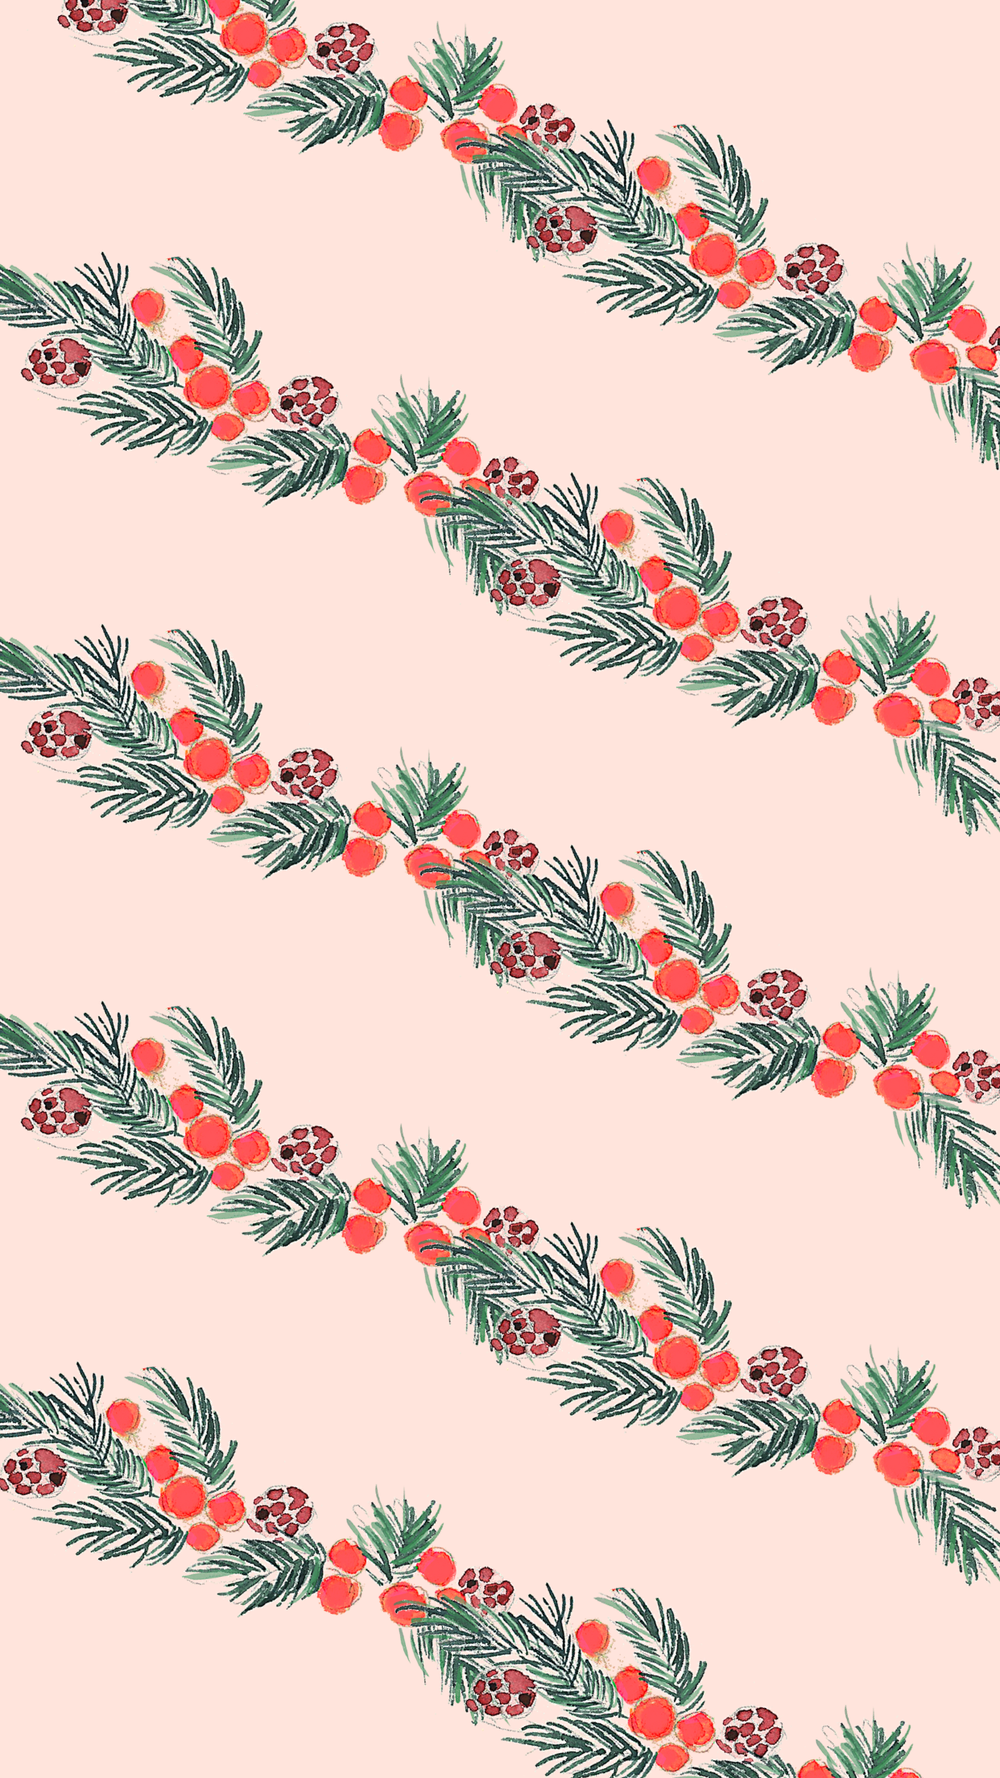 A Christmas Pattern With Red And Green Leaves